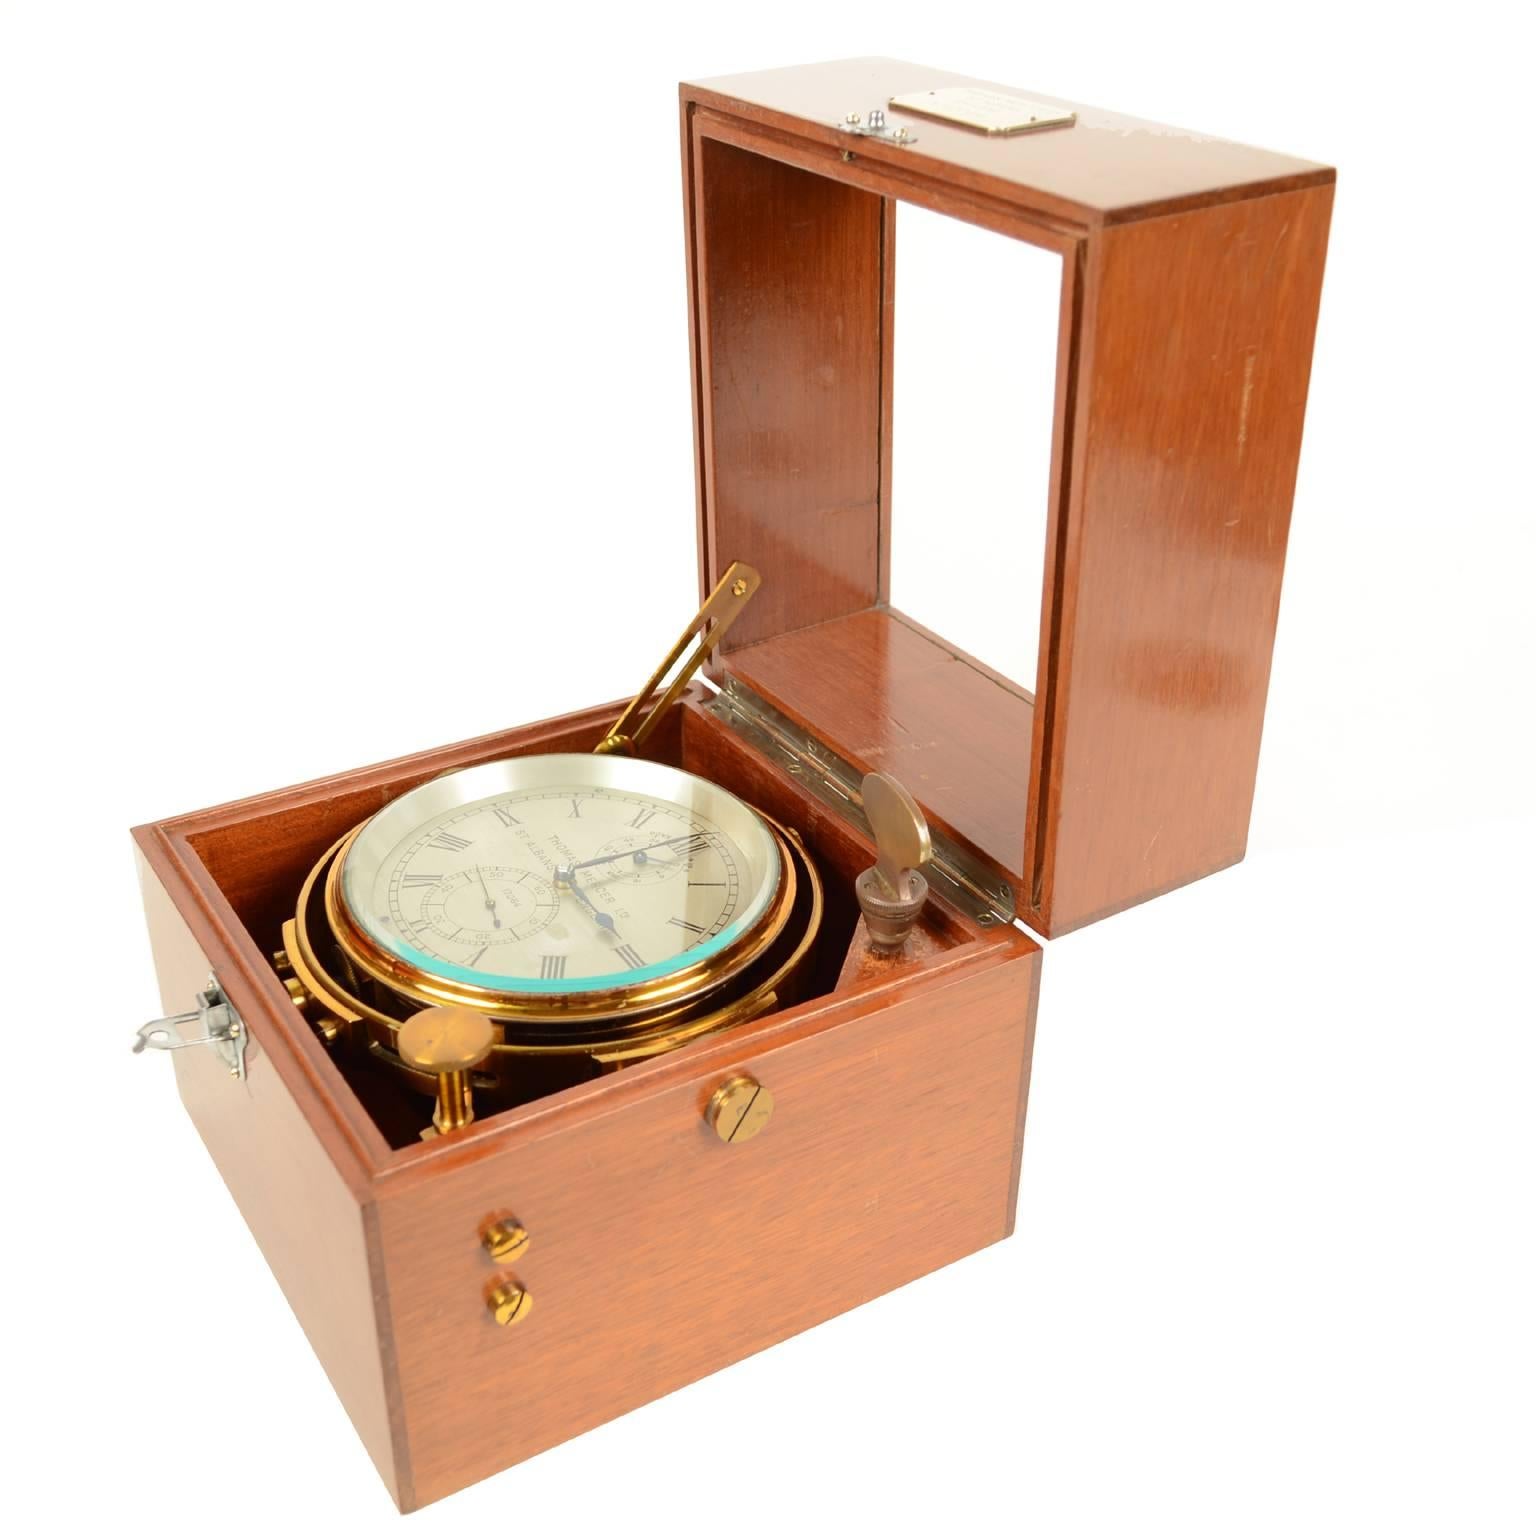 Marine chronometer signed Thomas Mercer Ltd St. Albans England, n. 17064, made in the 1940s. Mechanical hand-wound movement with power reserve of 56 hours, complete with original key; mahogany case with glass top. Diameter of the dial cm 12 - inches